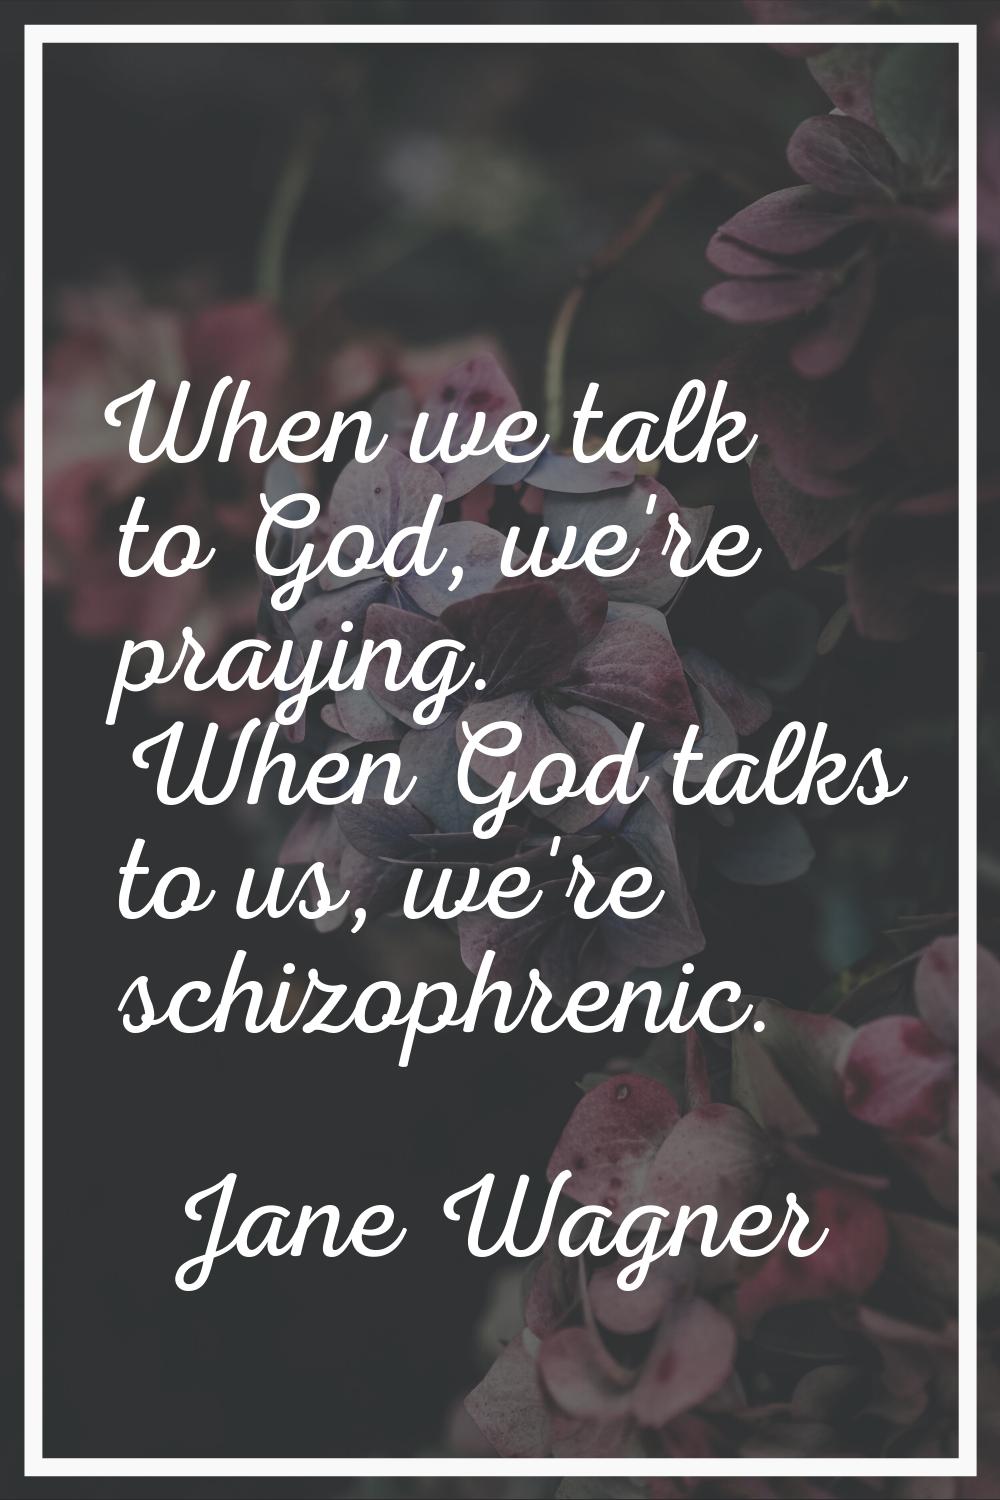 When we talk to God, we're praying. When God talks to us, we're schizophrenic.